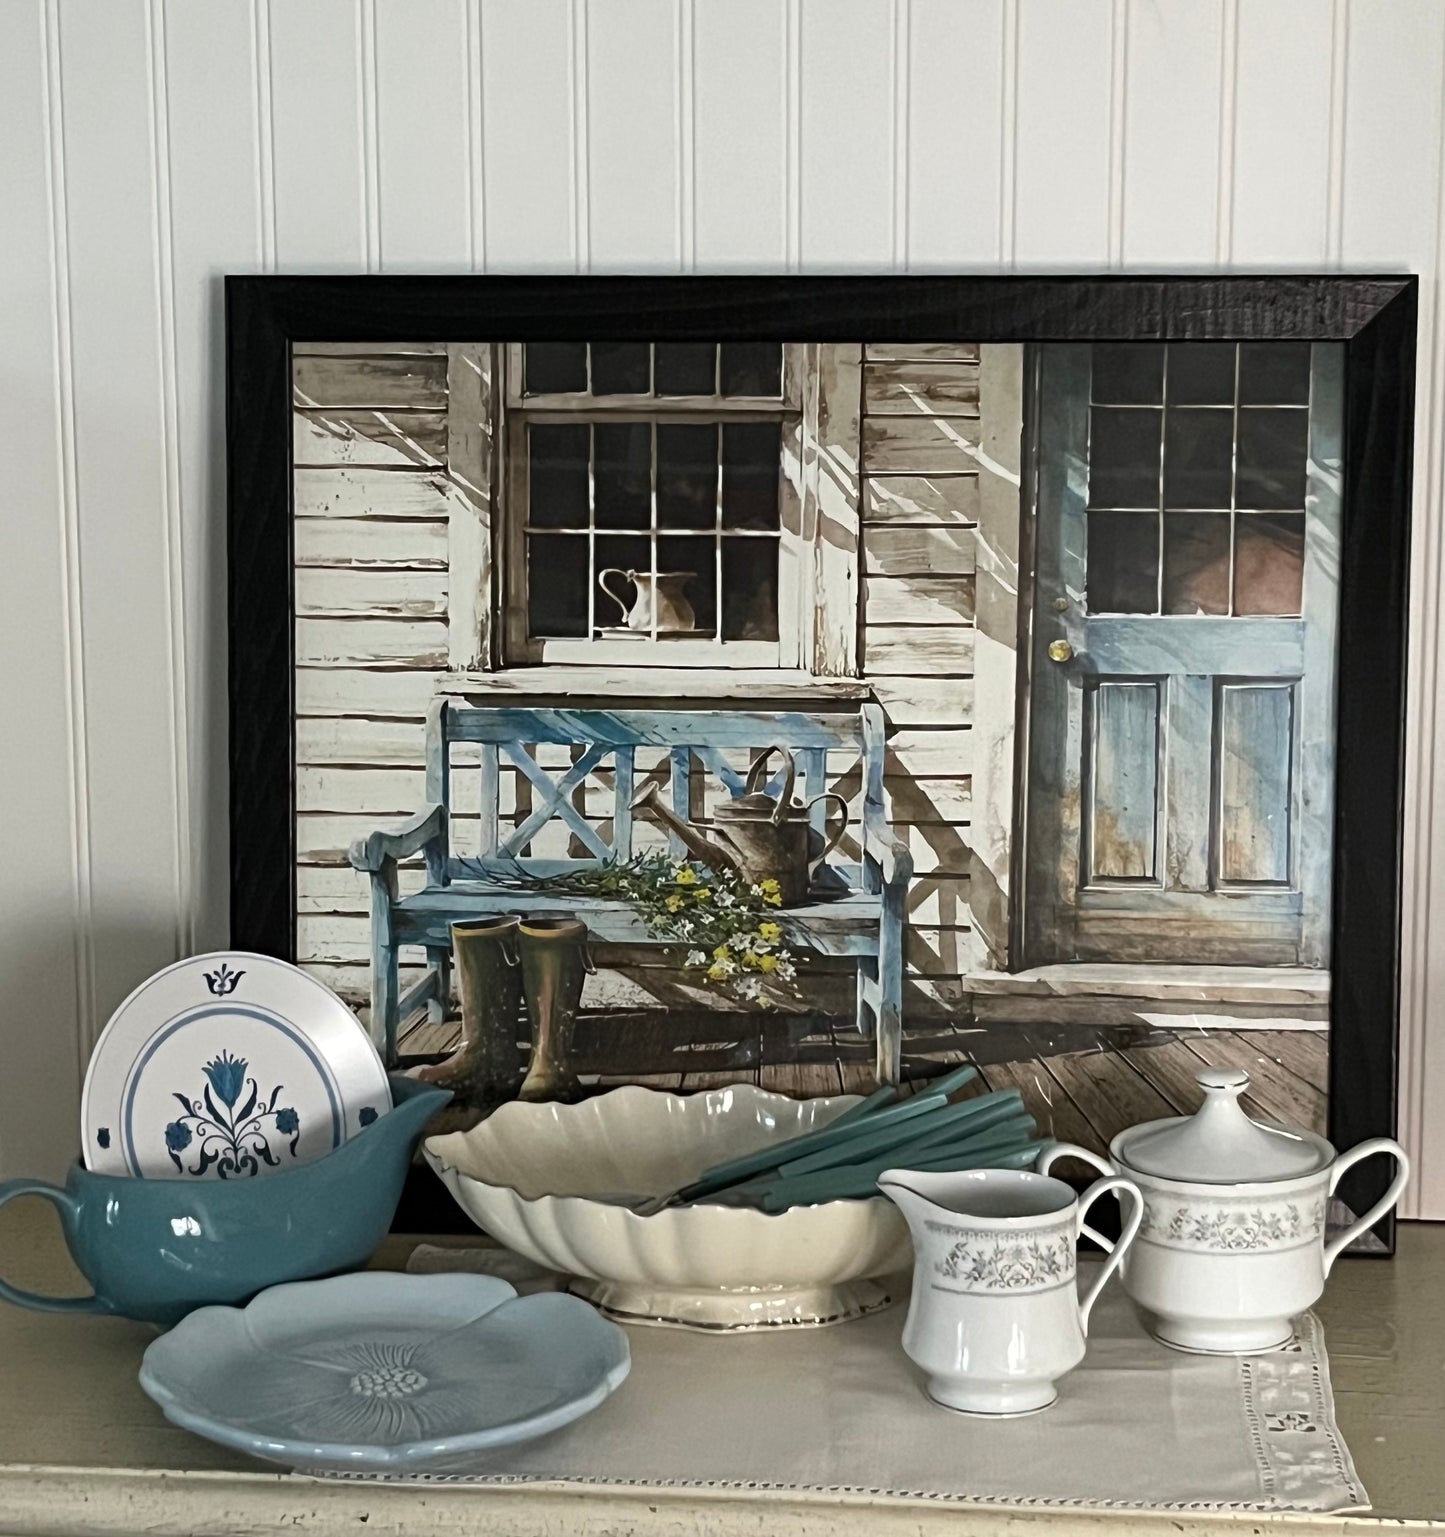 Rustic Charm Unleashed: Vintage "Cheerful Chores" Wall Art by John Rossinie